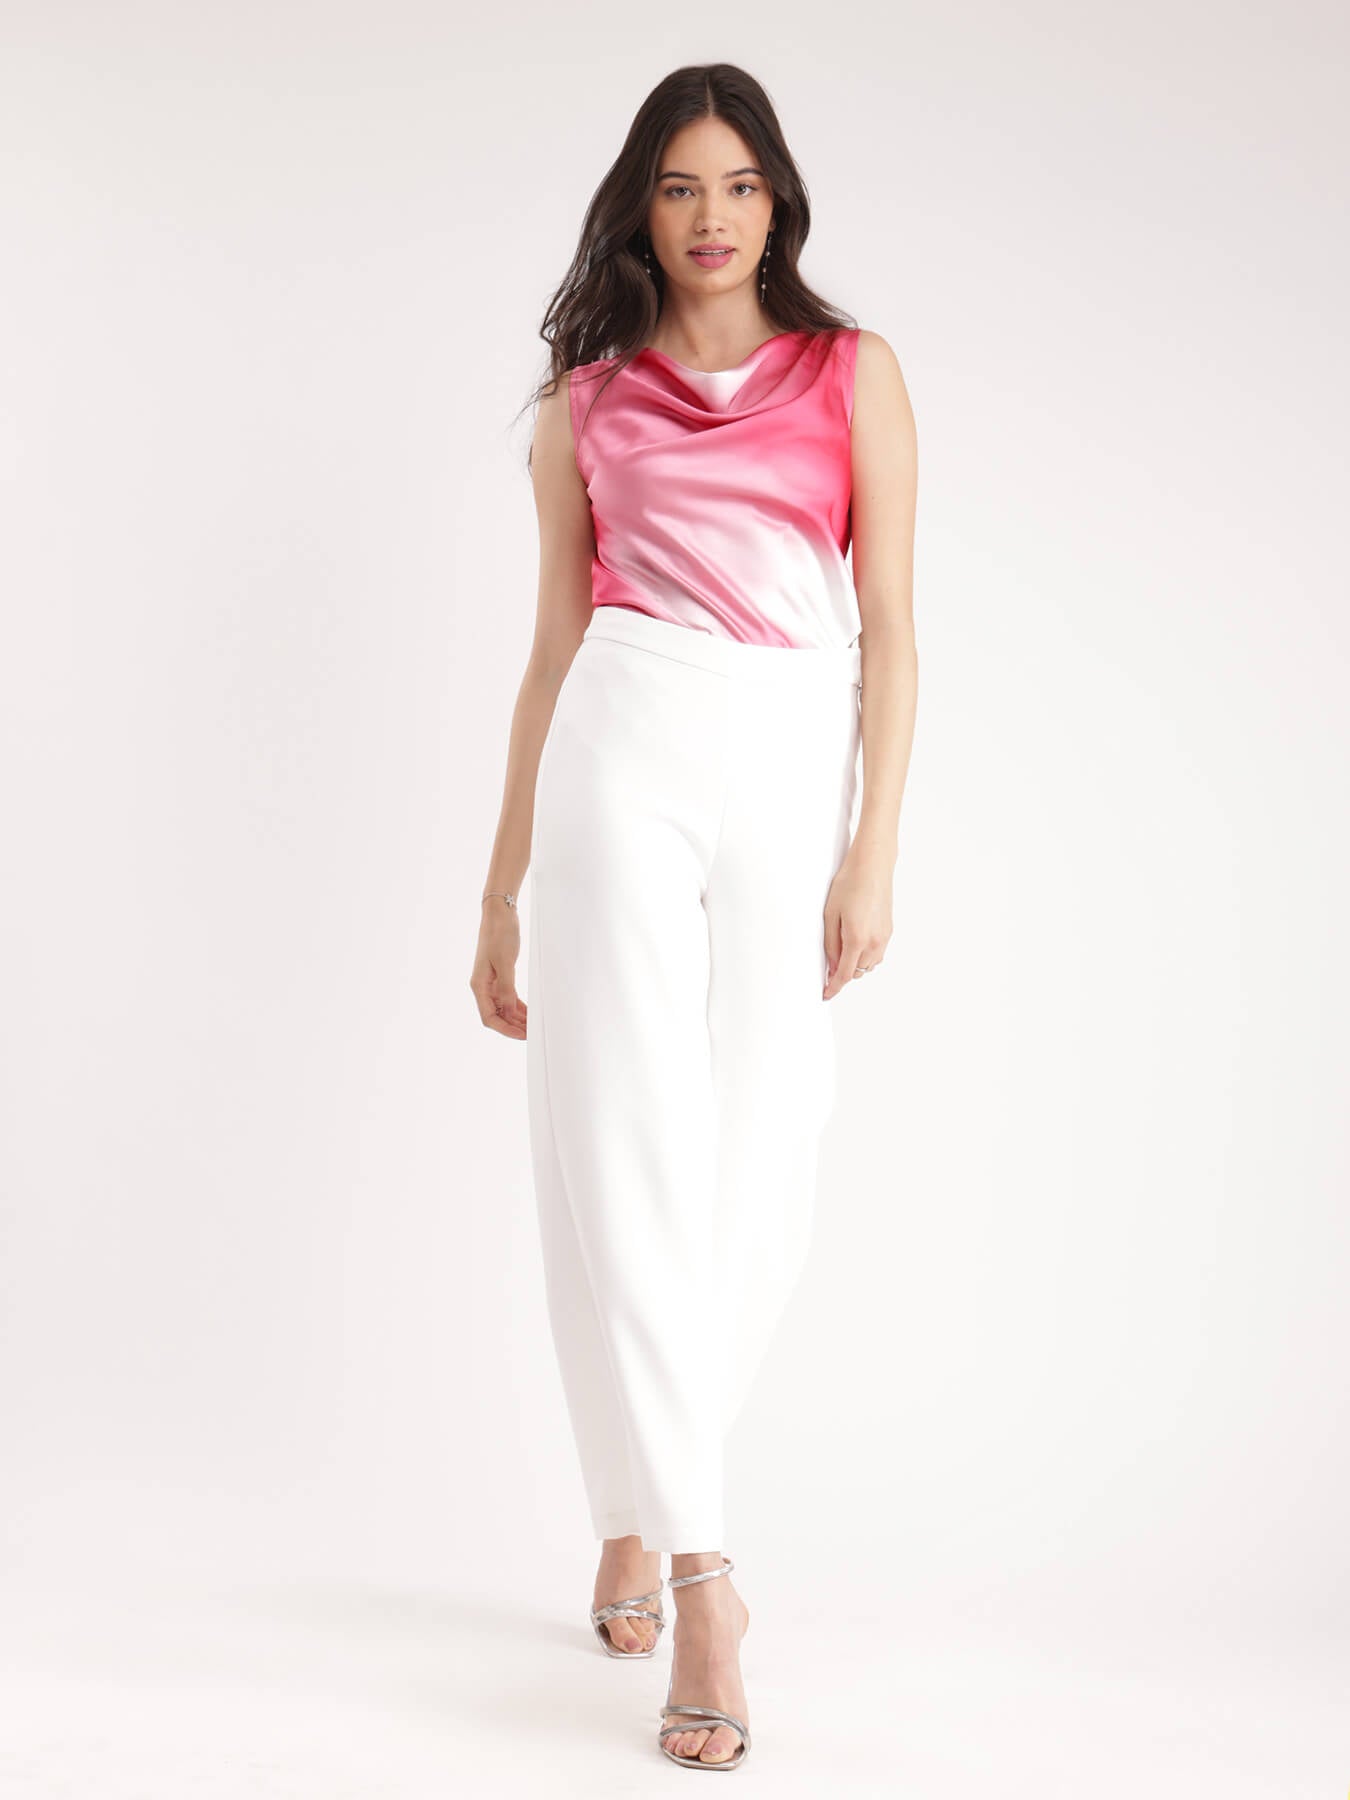 Satin Ombre Top - Pink And White